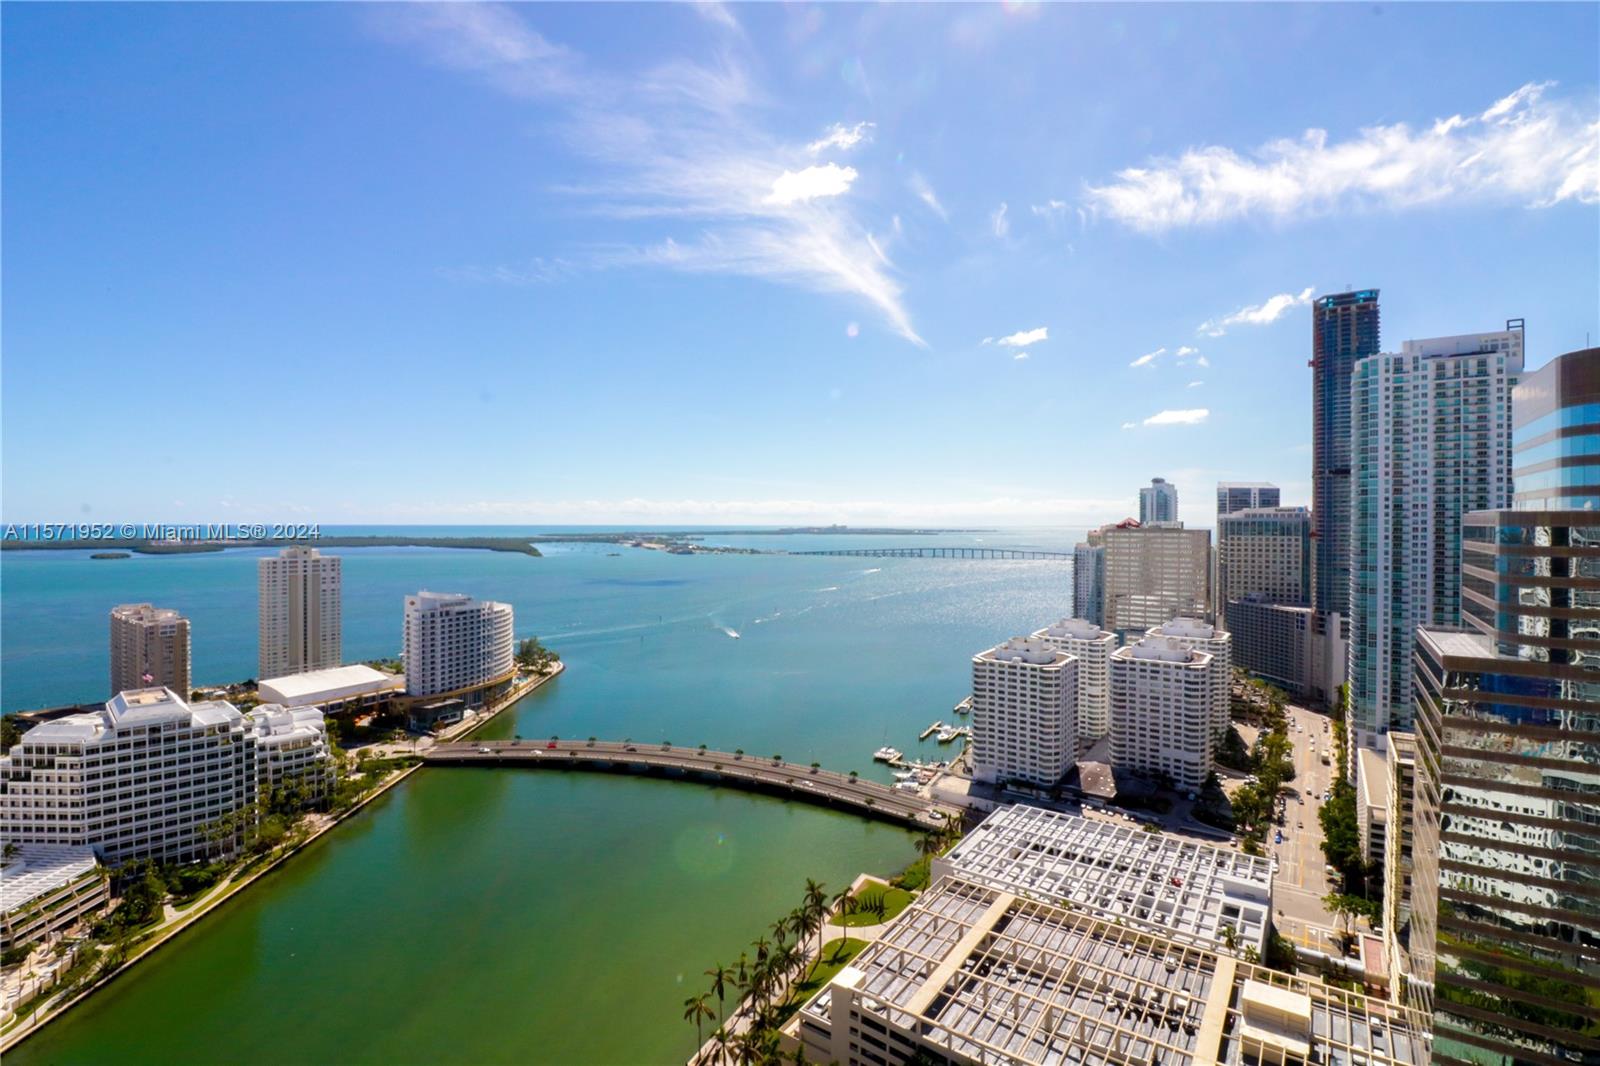 Bright, High Floor, Corner, Unfurnished Condo @ Tower II, ICON BRICKELL. See the BAY Sunsets & Cruises from your Balcony. This residence features 1,255 Sq Ft of Living Area, 1,455 Sq Ft Total area as per developer floor plan. 180° Views to the Bay & Miami City. Building features full time concierge, 5 Star Spa, Movie Theater, fitness center, Olympic pool w/ lounging area, the World Famous restaurants "Cipriani" & Cantina La20. **** Assigned Parking Space, Water, basic Cable & Internet included ****  The proof of income/funds, recent credit score, current job info, and picture ID of all adults are required to be attached to the offer. Soon to be Vacant!!